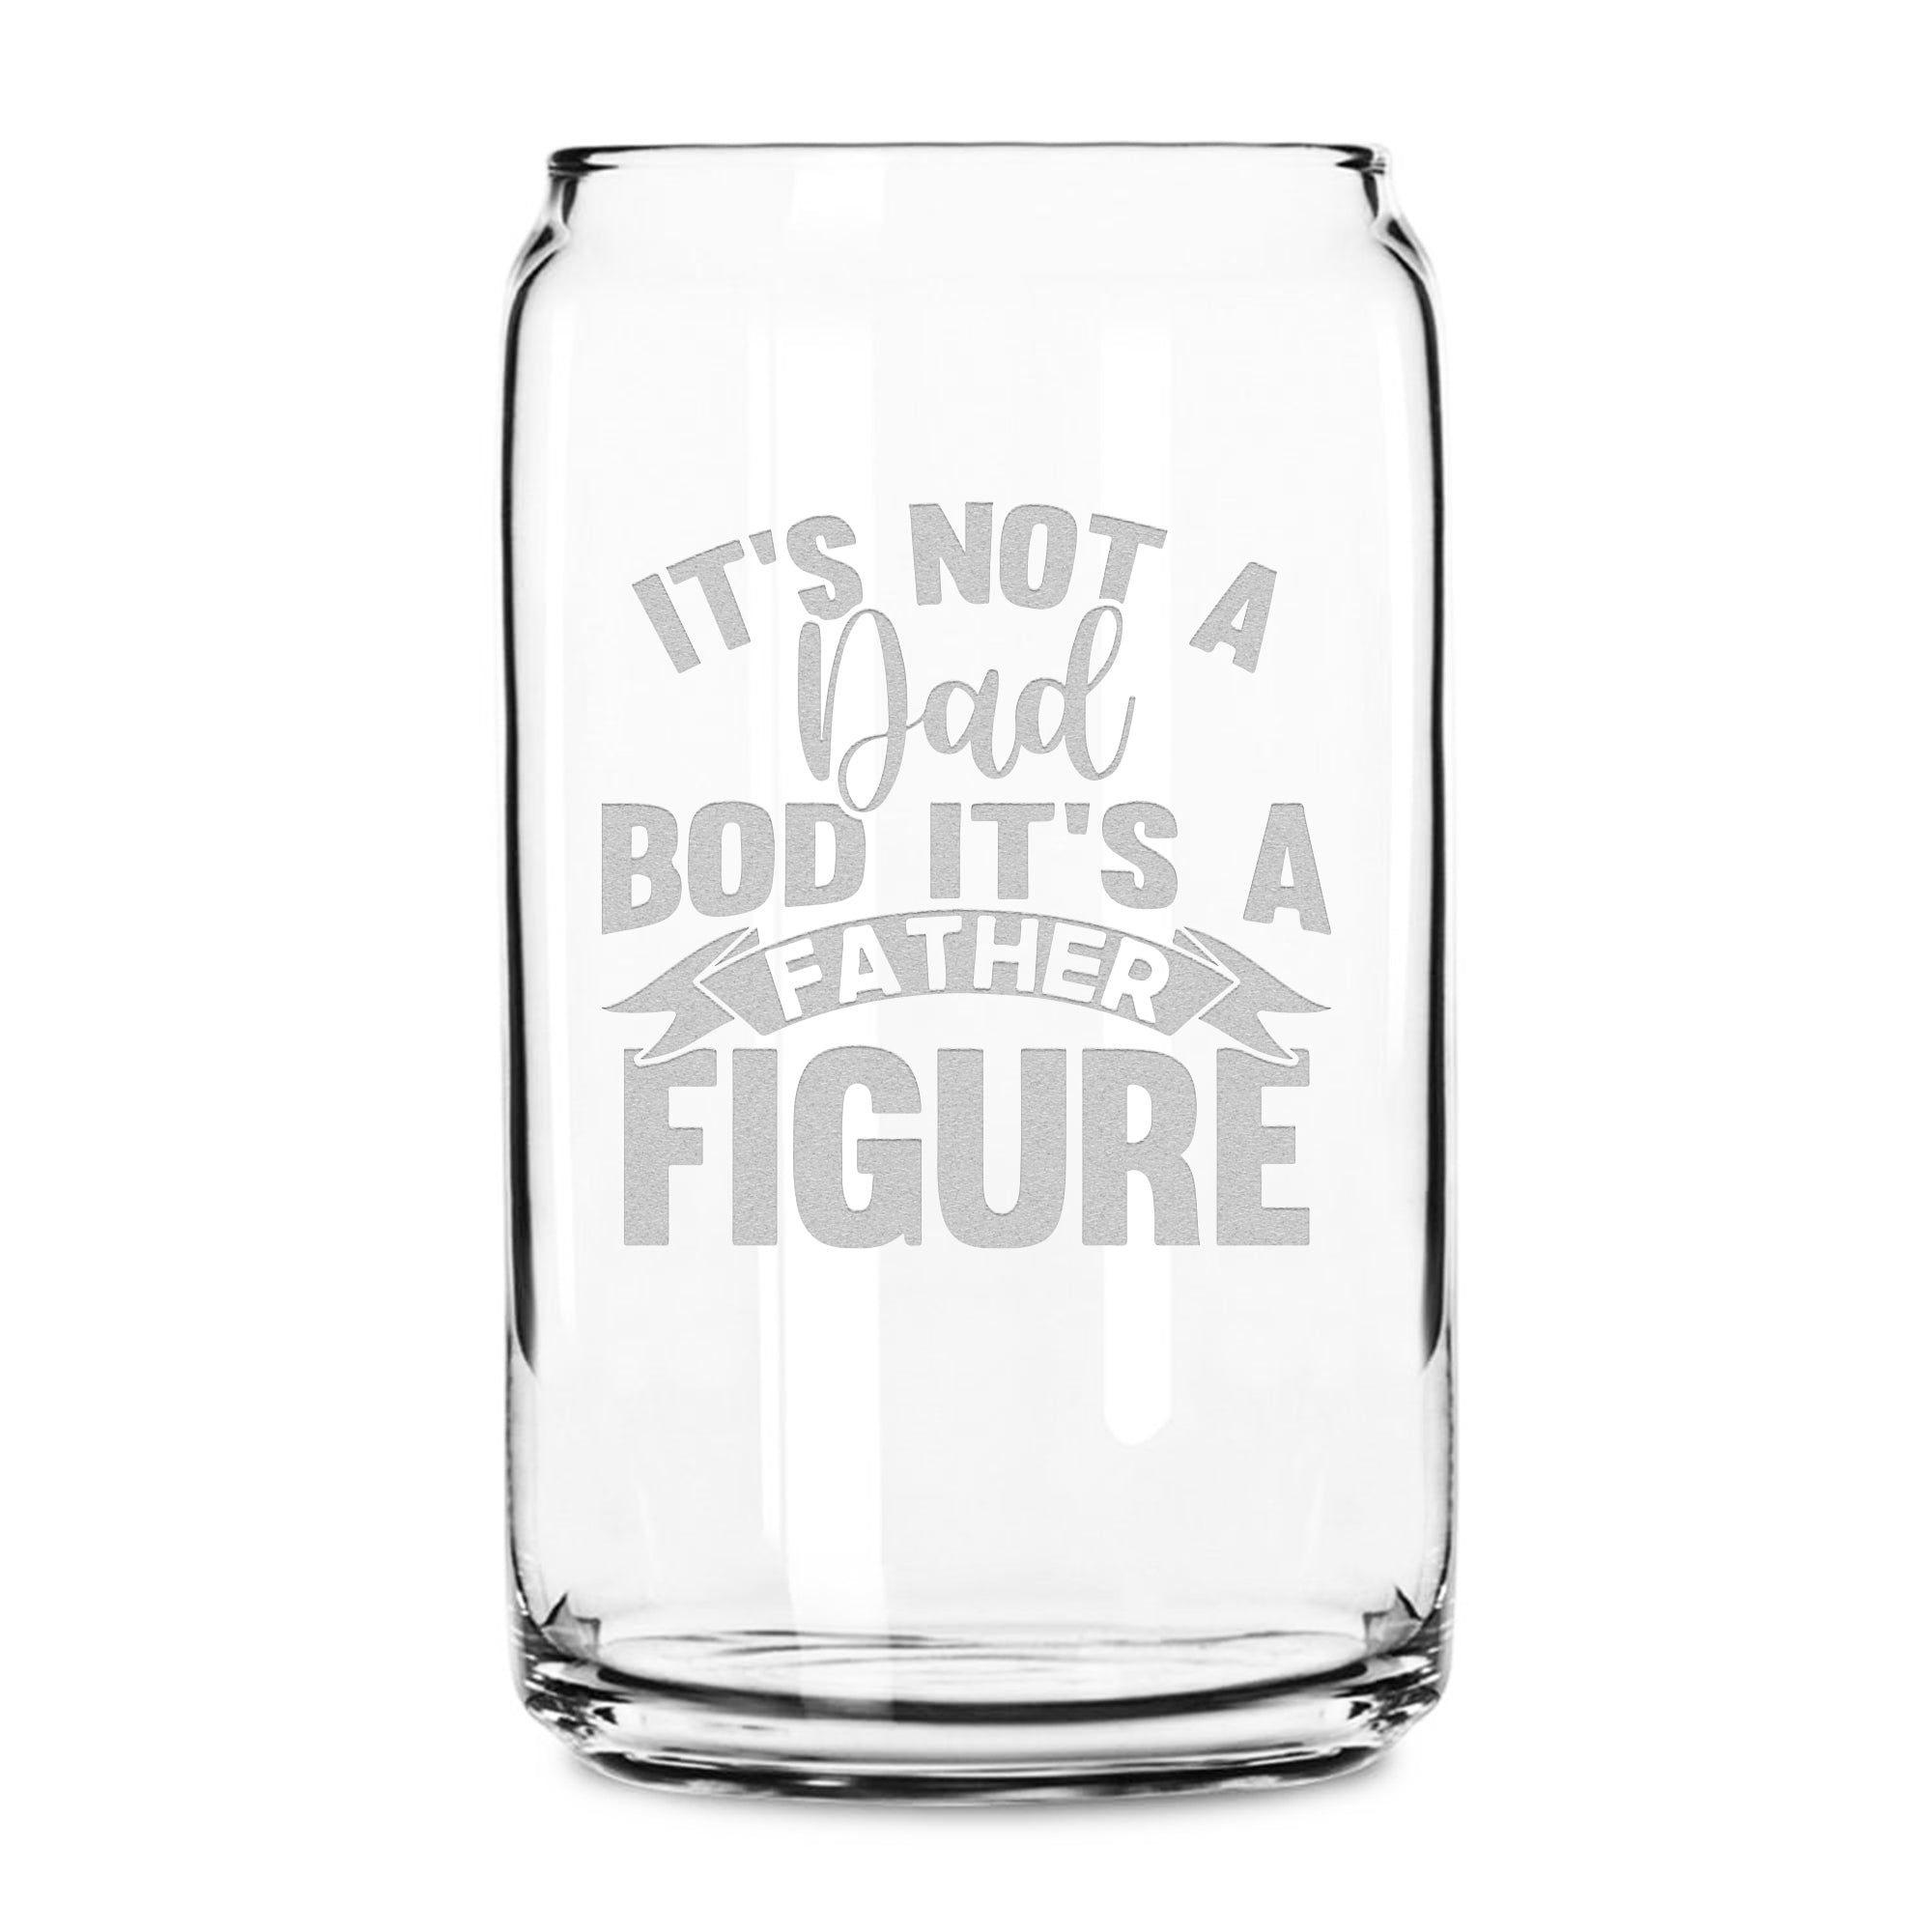 Integrity Bottles, Father Figure, Premium Beer Can Glass, Handmade, Handblown, Hand Etched Gifts, Sand Carved, 16oz